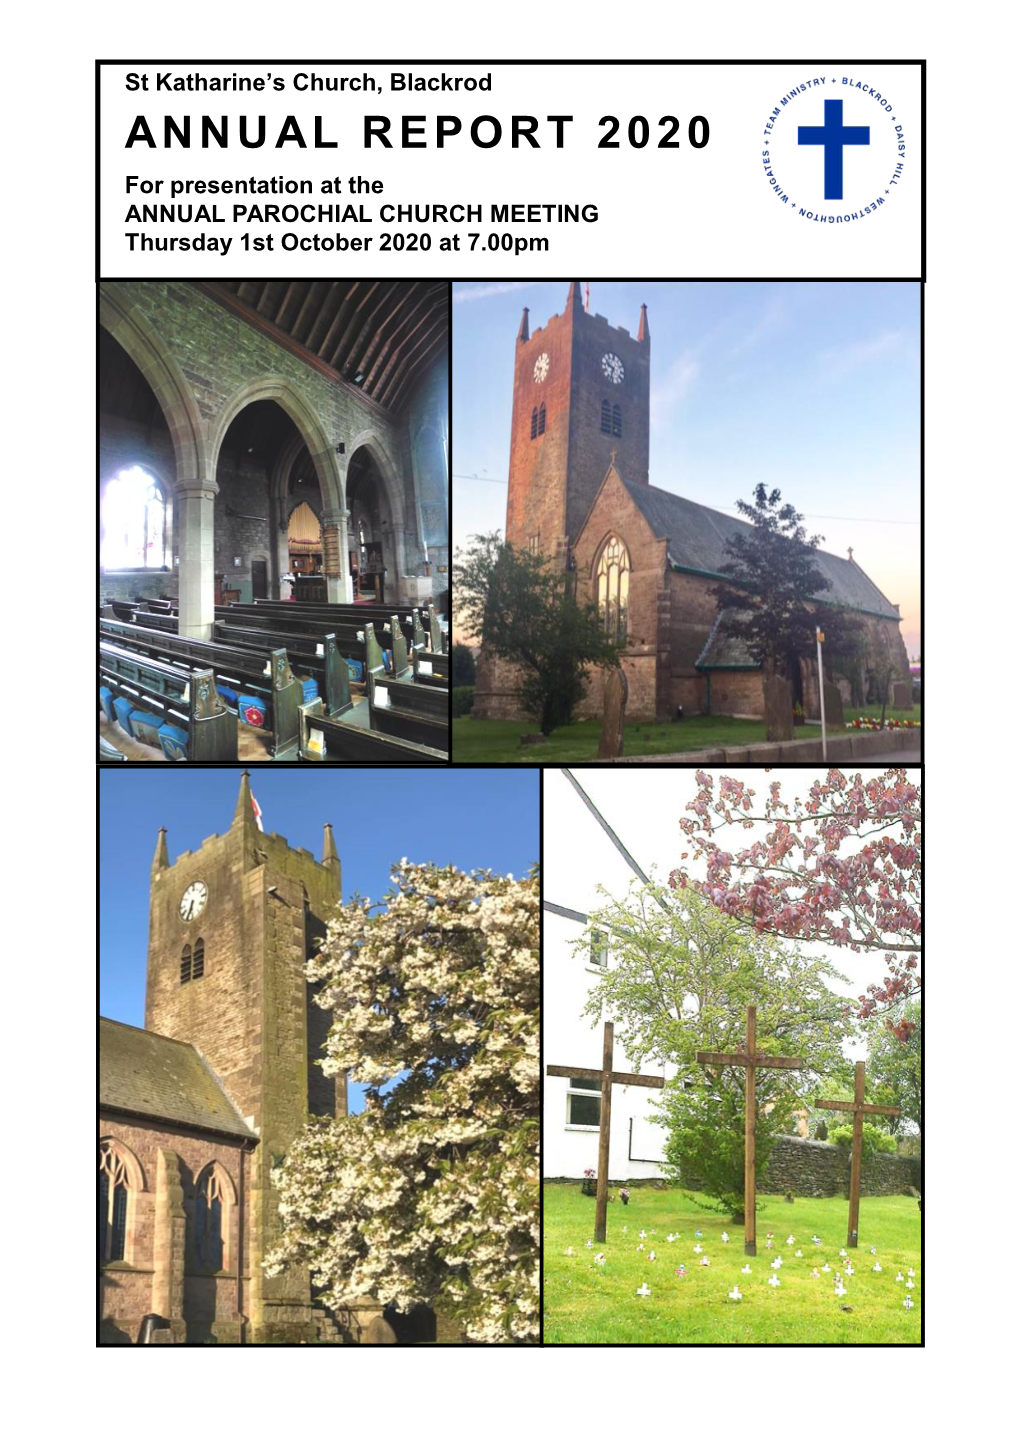 ANNUAL REPORT 2020 for Presentation at the ANNUAL PAROCHIAL CHURCH MEETING Thursday 1St October 2020 at 7.00Pm